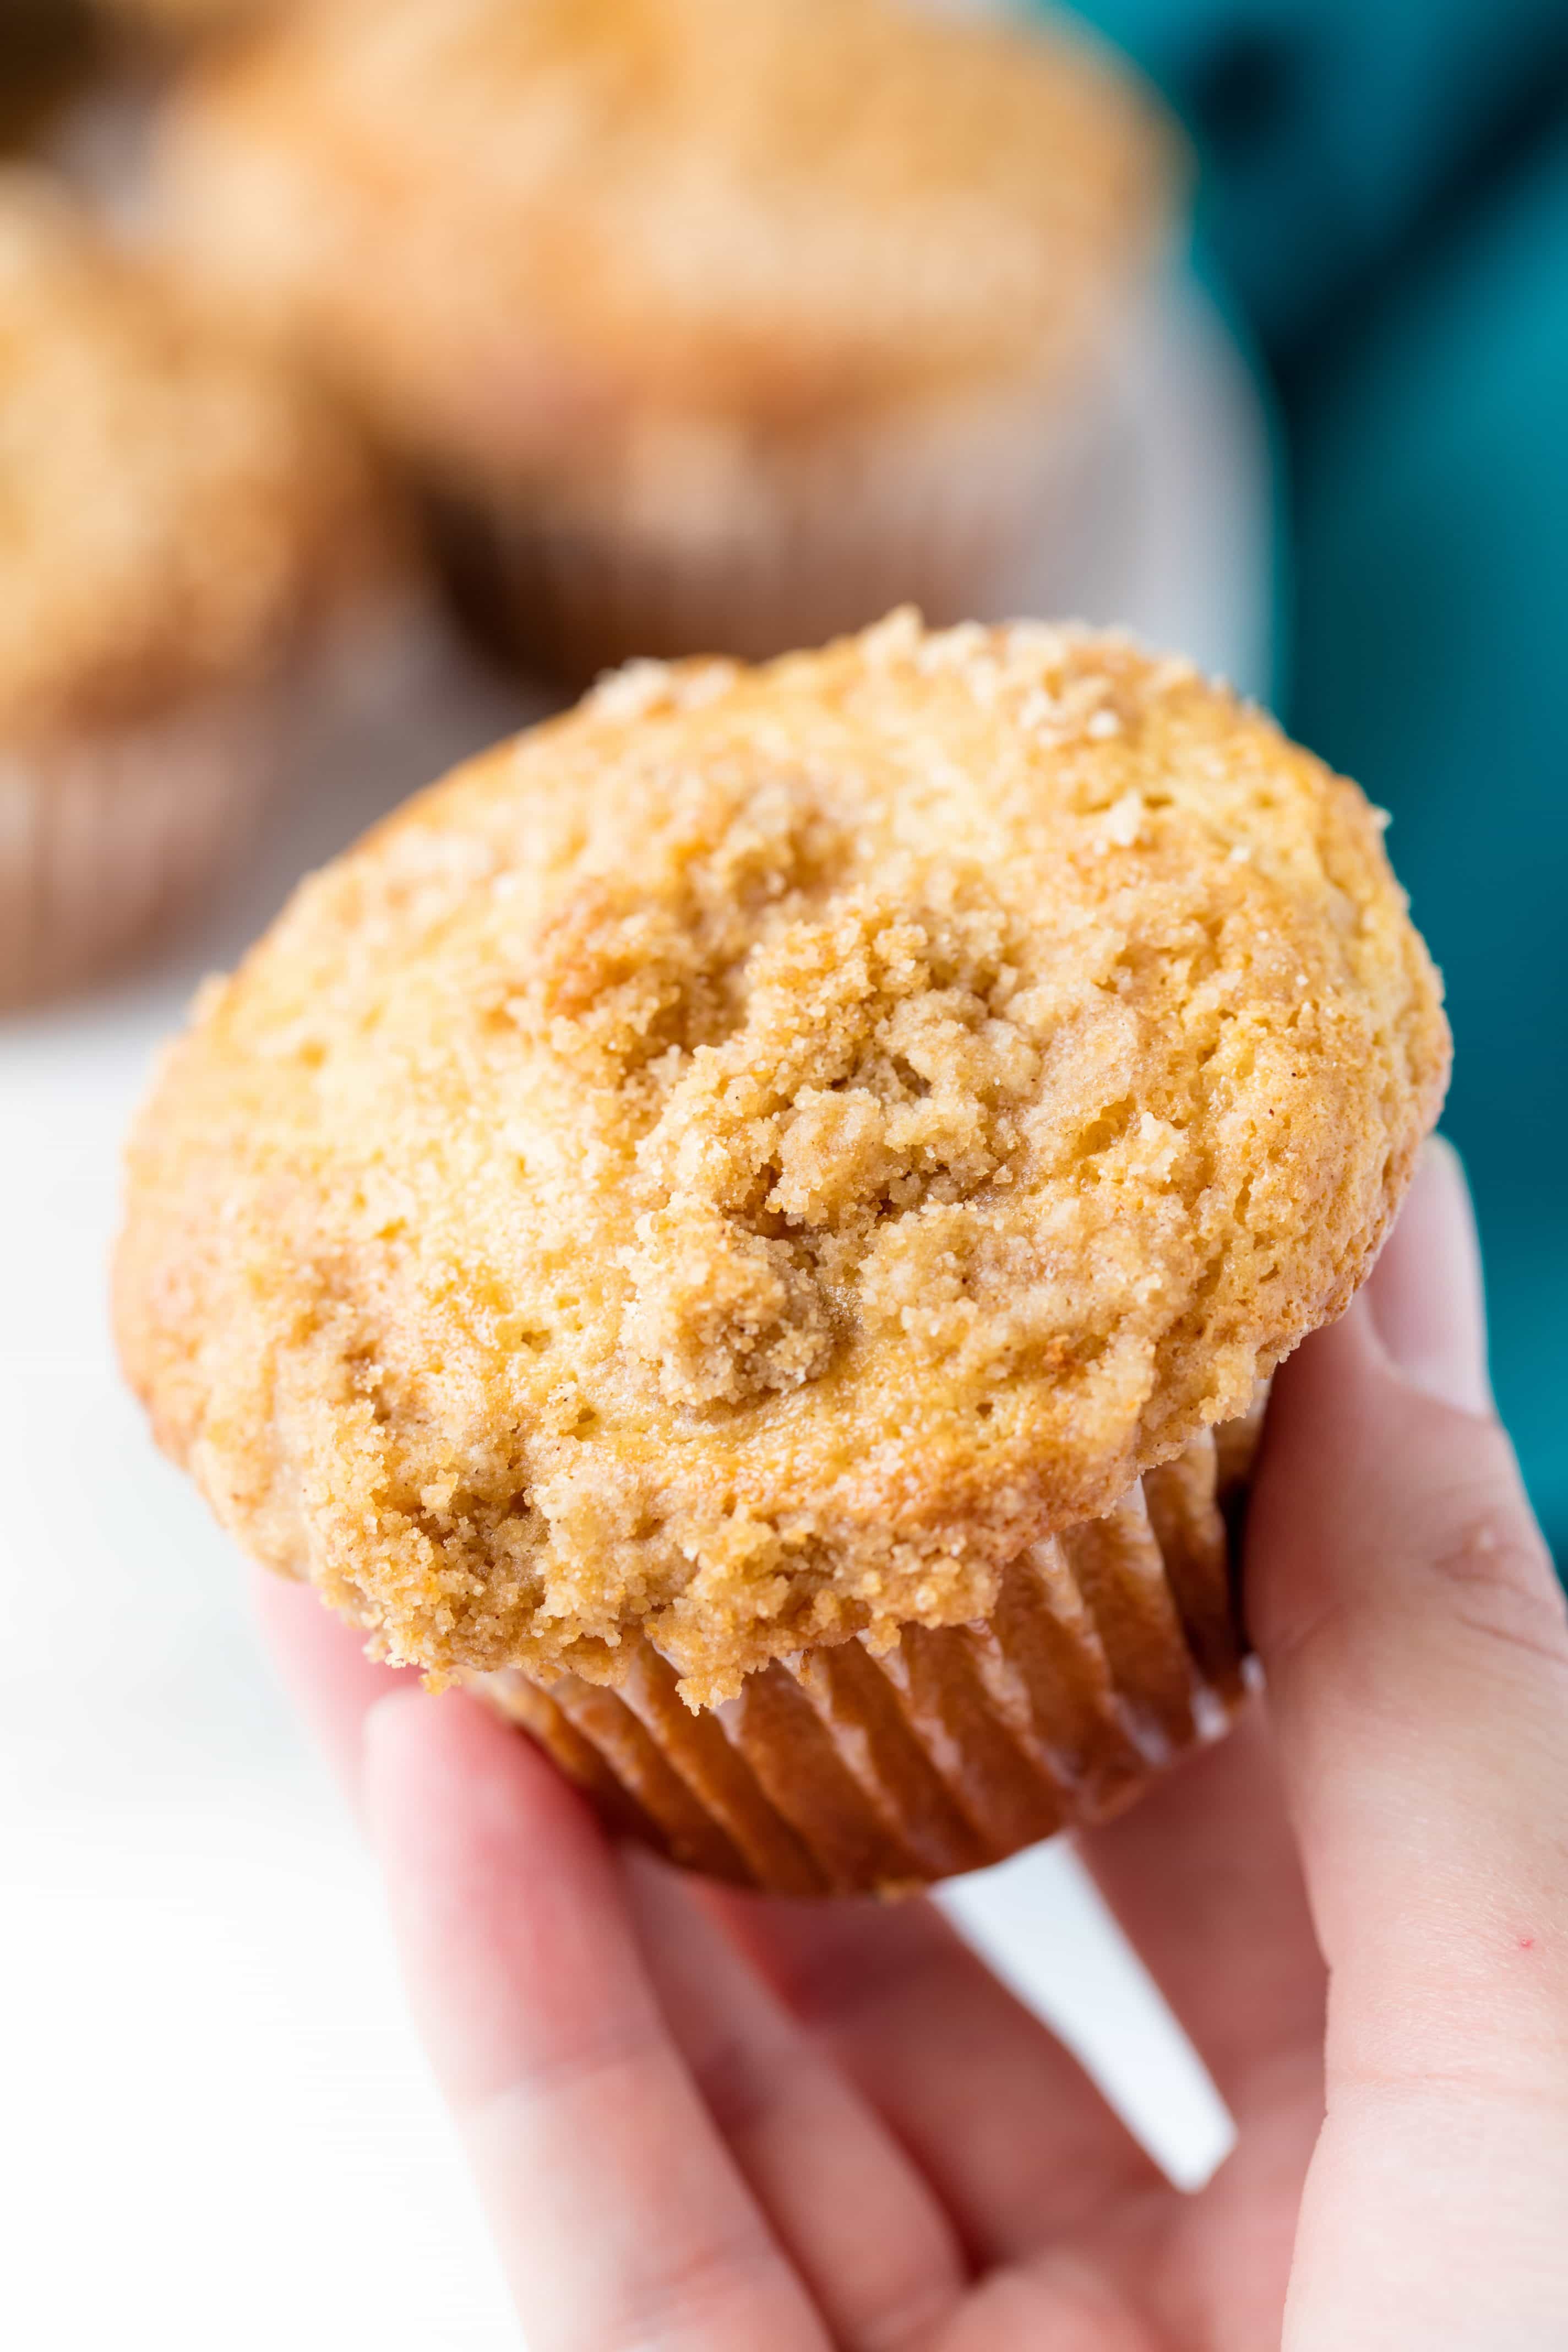 Sour Cream Coffee Cake Muffins are super moist and topped with the most delicious streusel topping. You'll love these classic muffins!